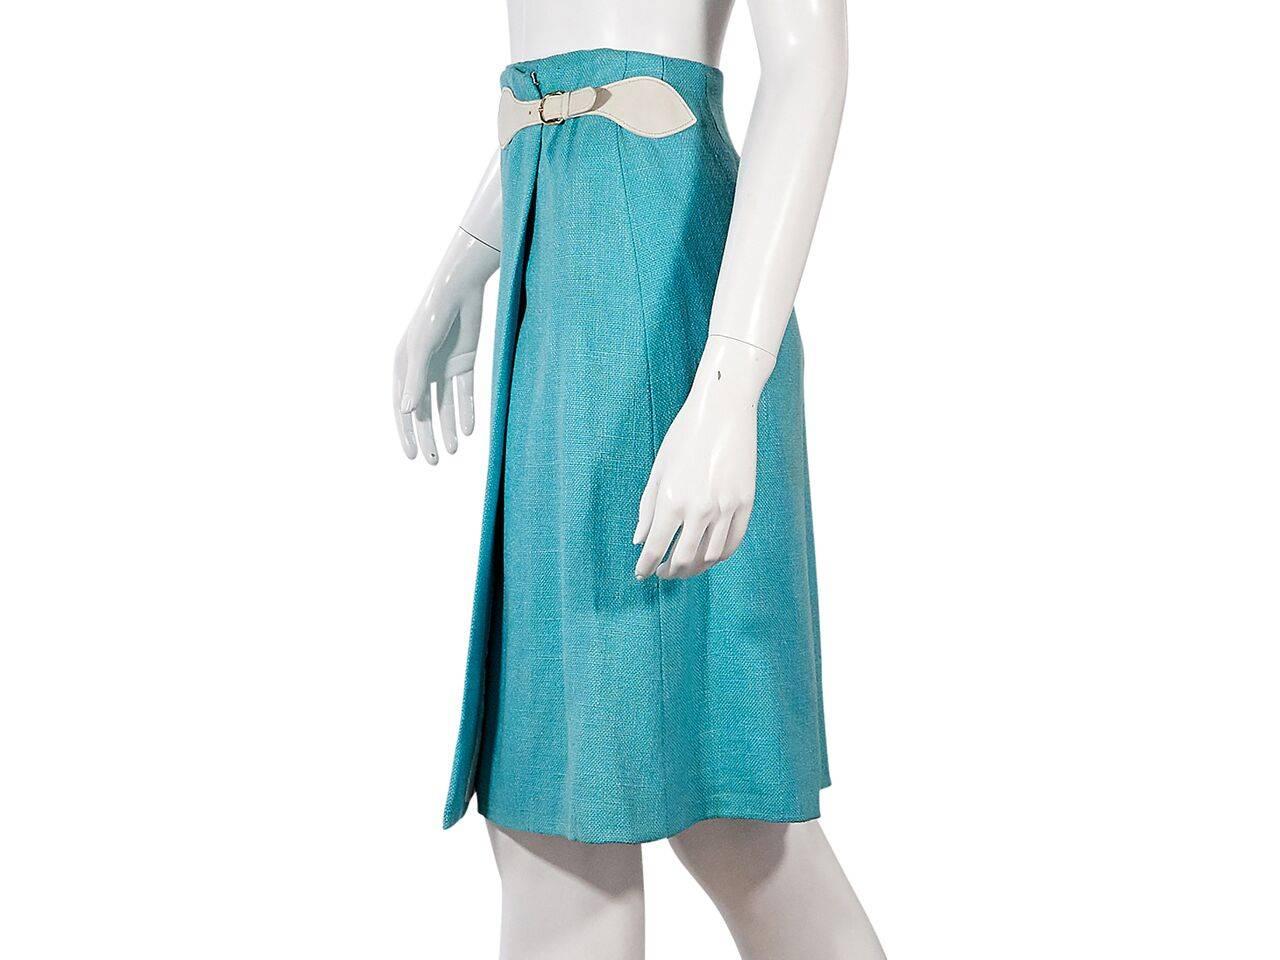 Product details:  Vintage teal blue wrap skirt by Hermès.  Side buckle strap closure.  Label size FR 38. 
Condition: Pre-owned. Very good.
Est. Retail $ 998.00